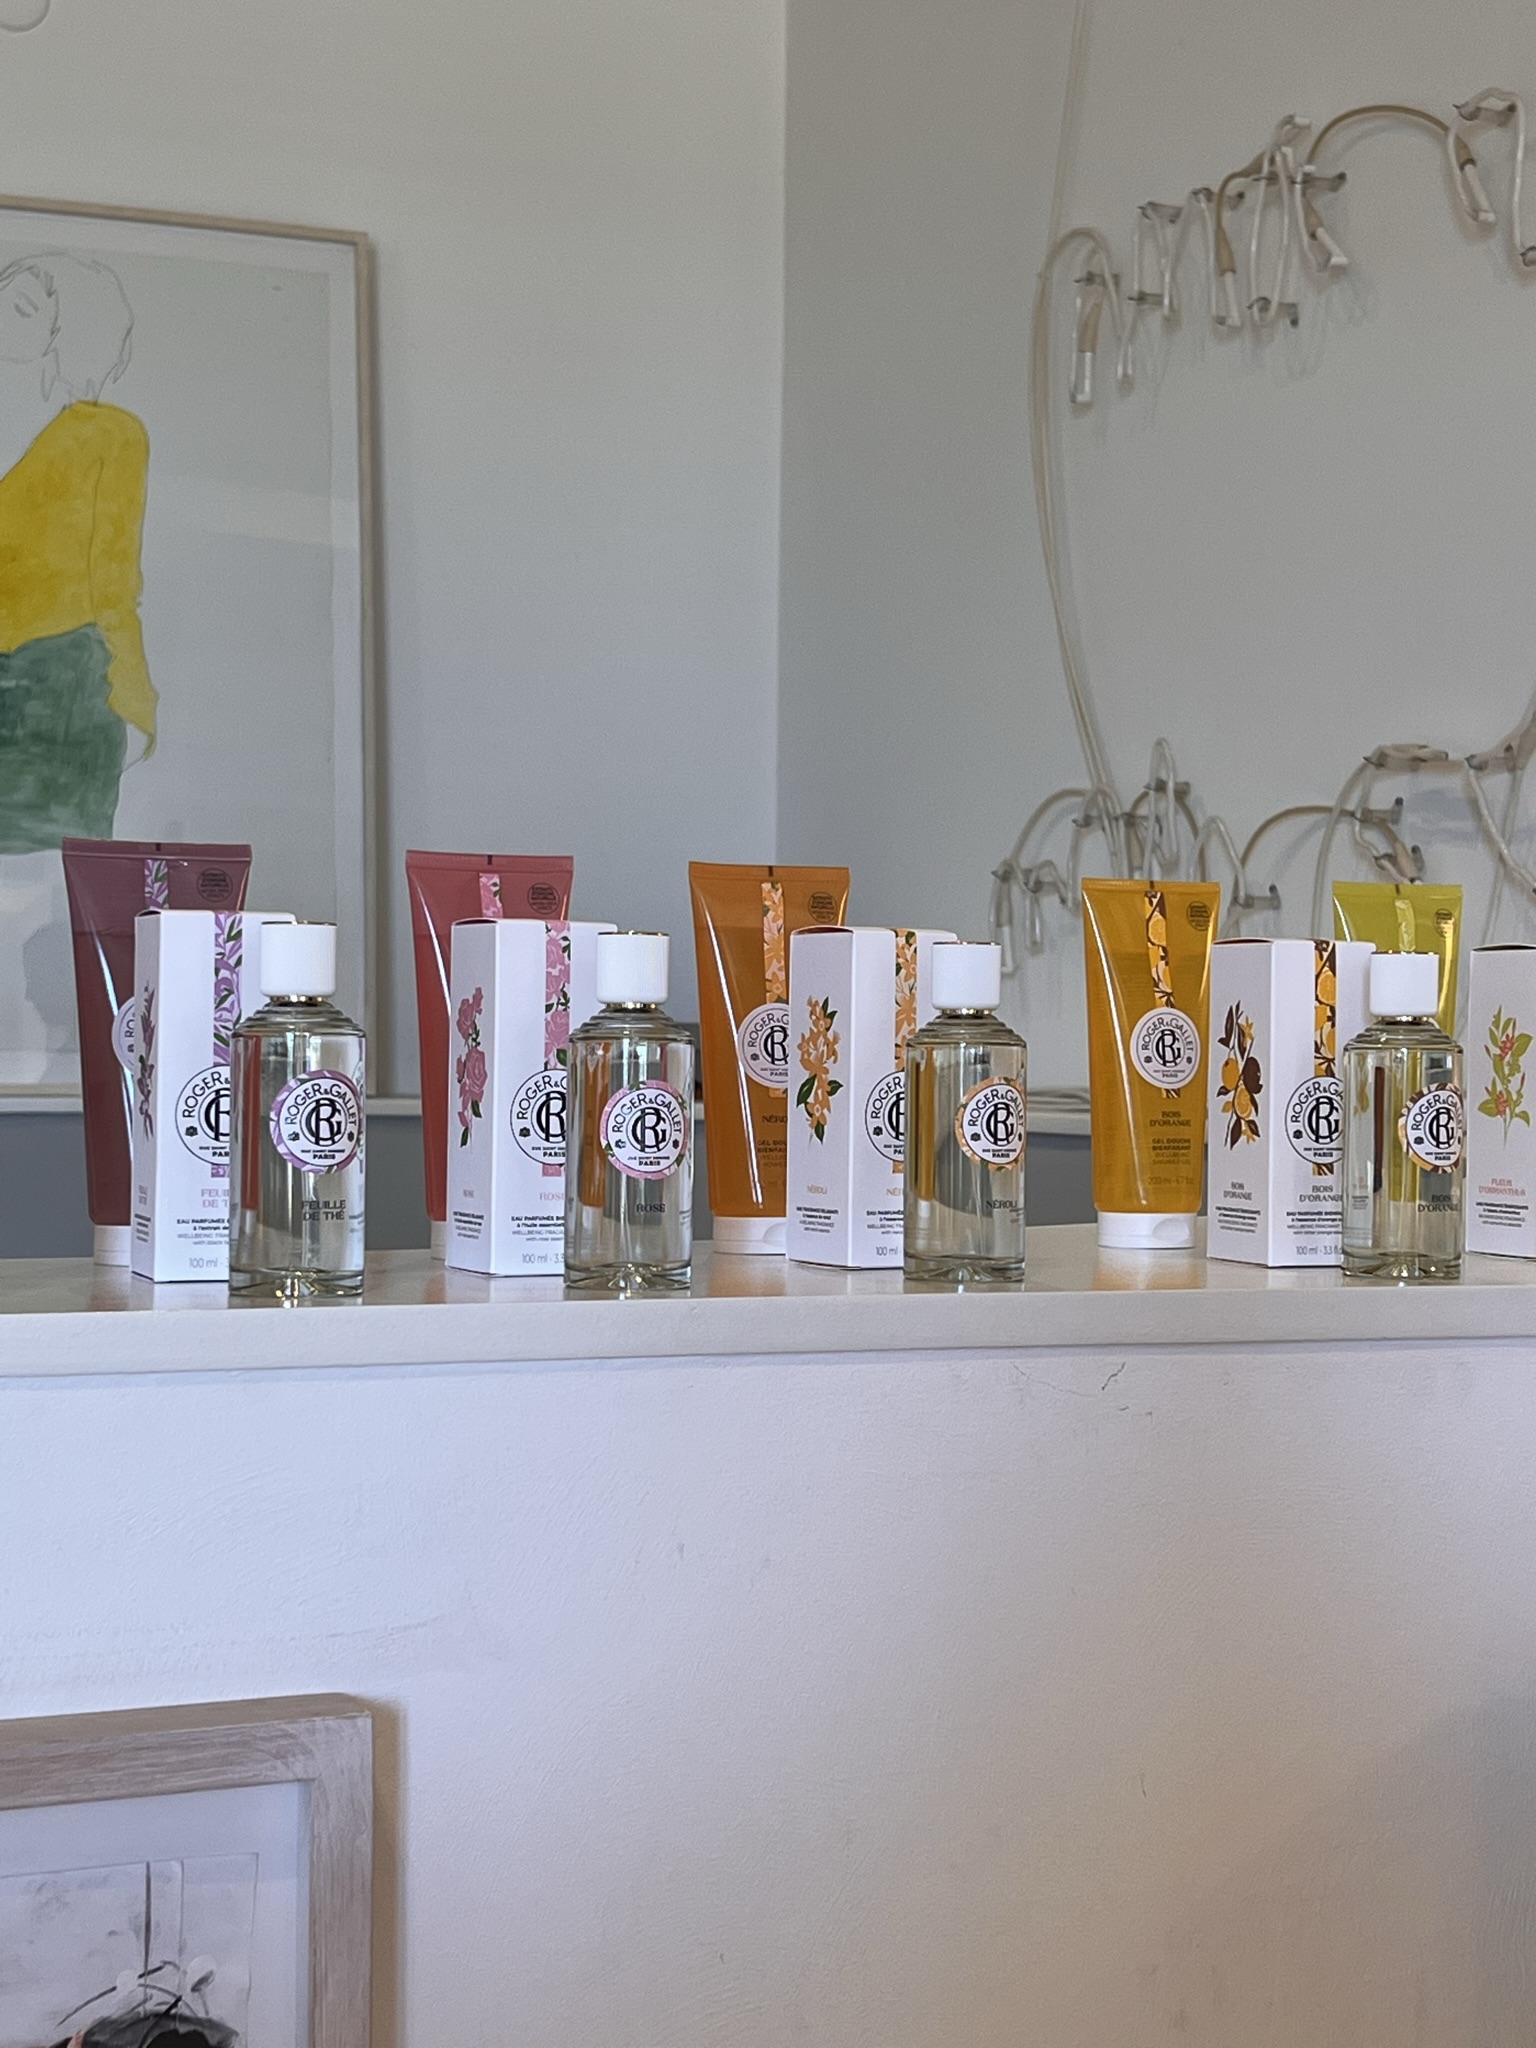 Beauty News: Roger & Gallet Fragrant Water Collection. All you need to know about their new fragrant water launched in 2022. FLEUR DE FIGUIER, ROSE and GINGEMBRE ROUGE are a must try.